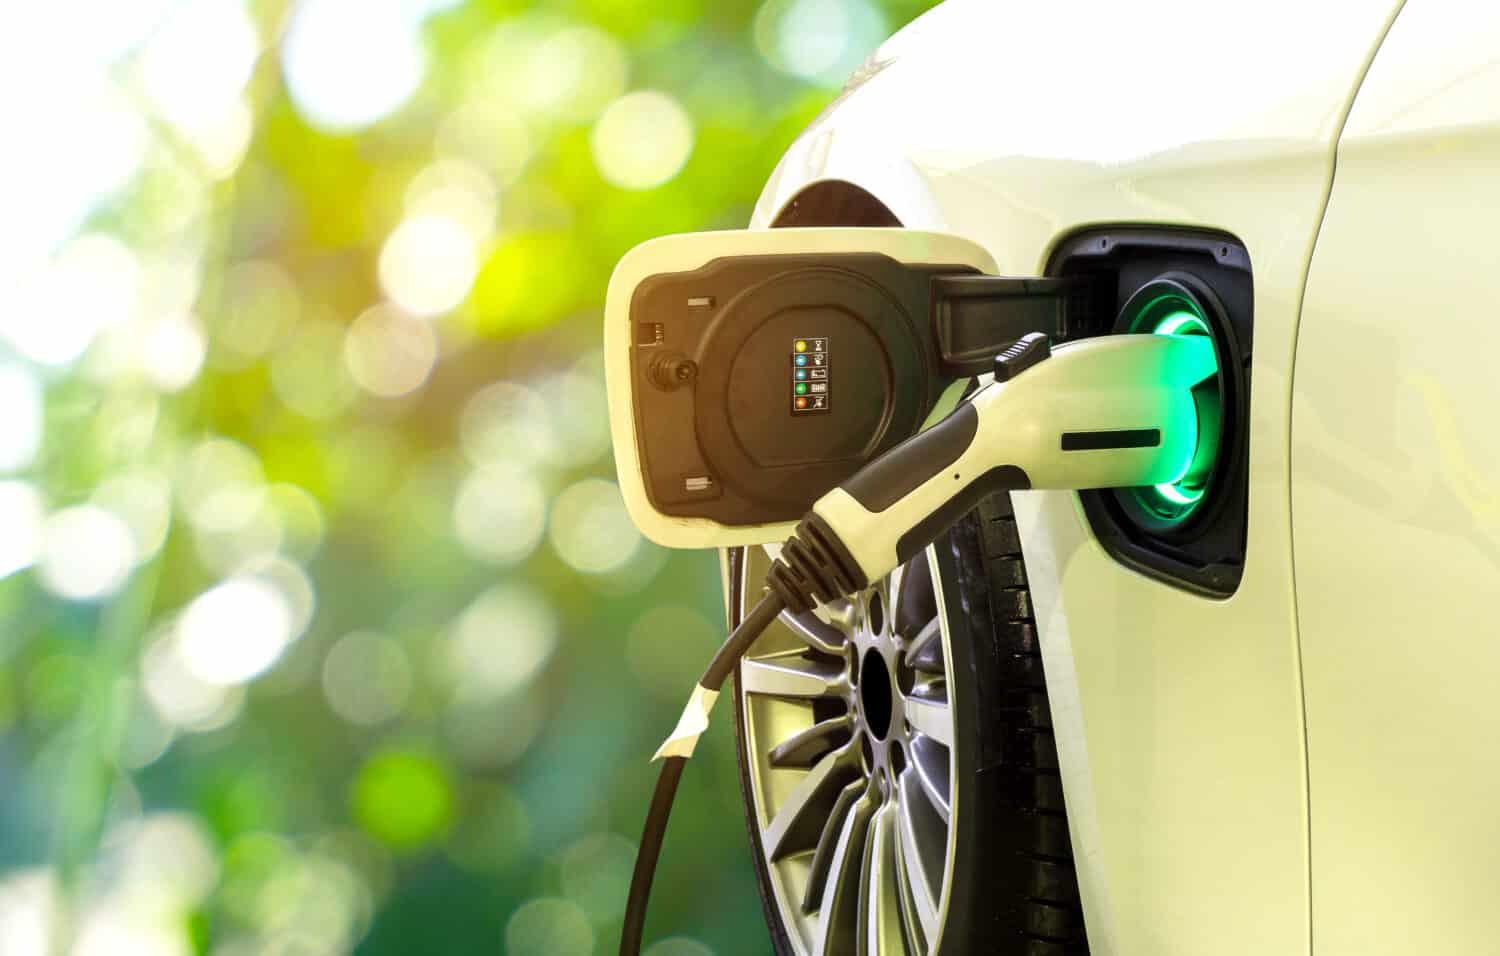 EV Car or Electric car at charging station with the power cable supply plugged in on blurred nature with soft light background. Eco-friendly alternative energy concept